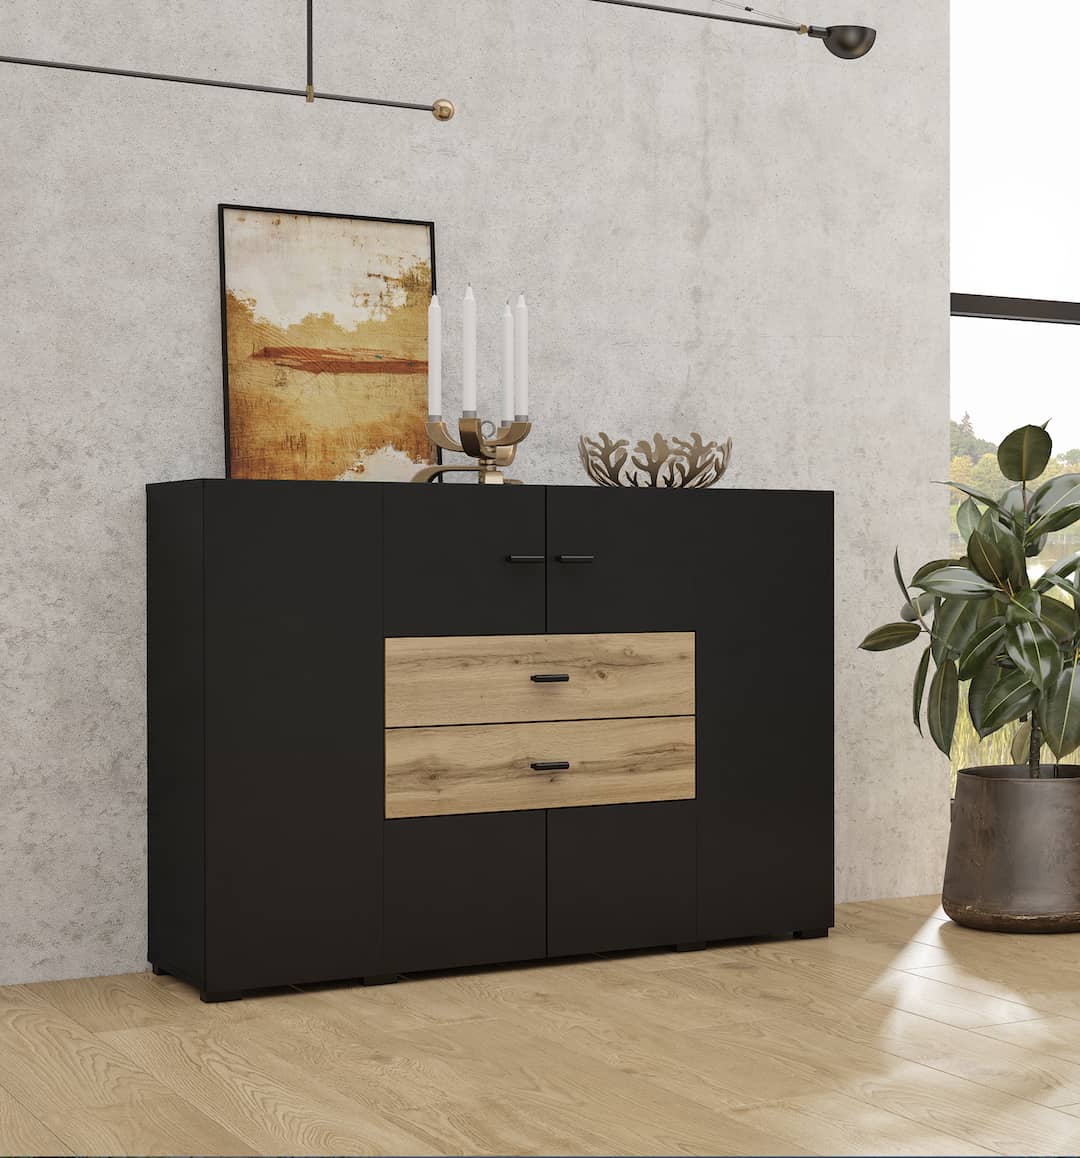 View Coby 43 Sideboard Cabinet 122cm Black 122cm information